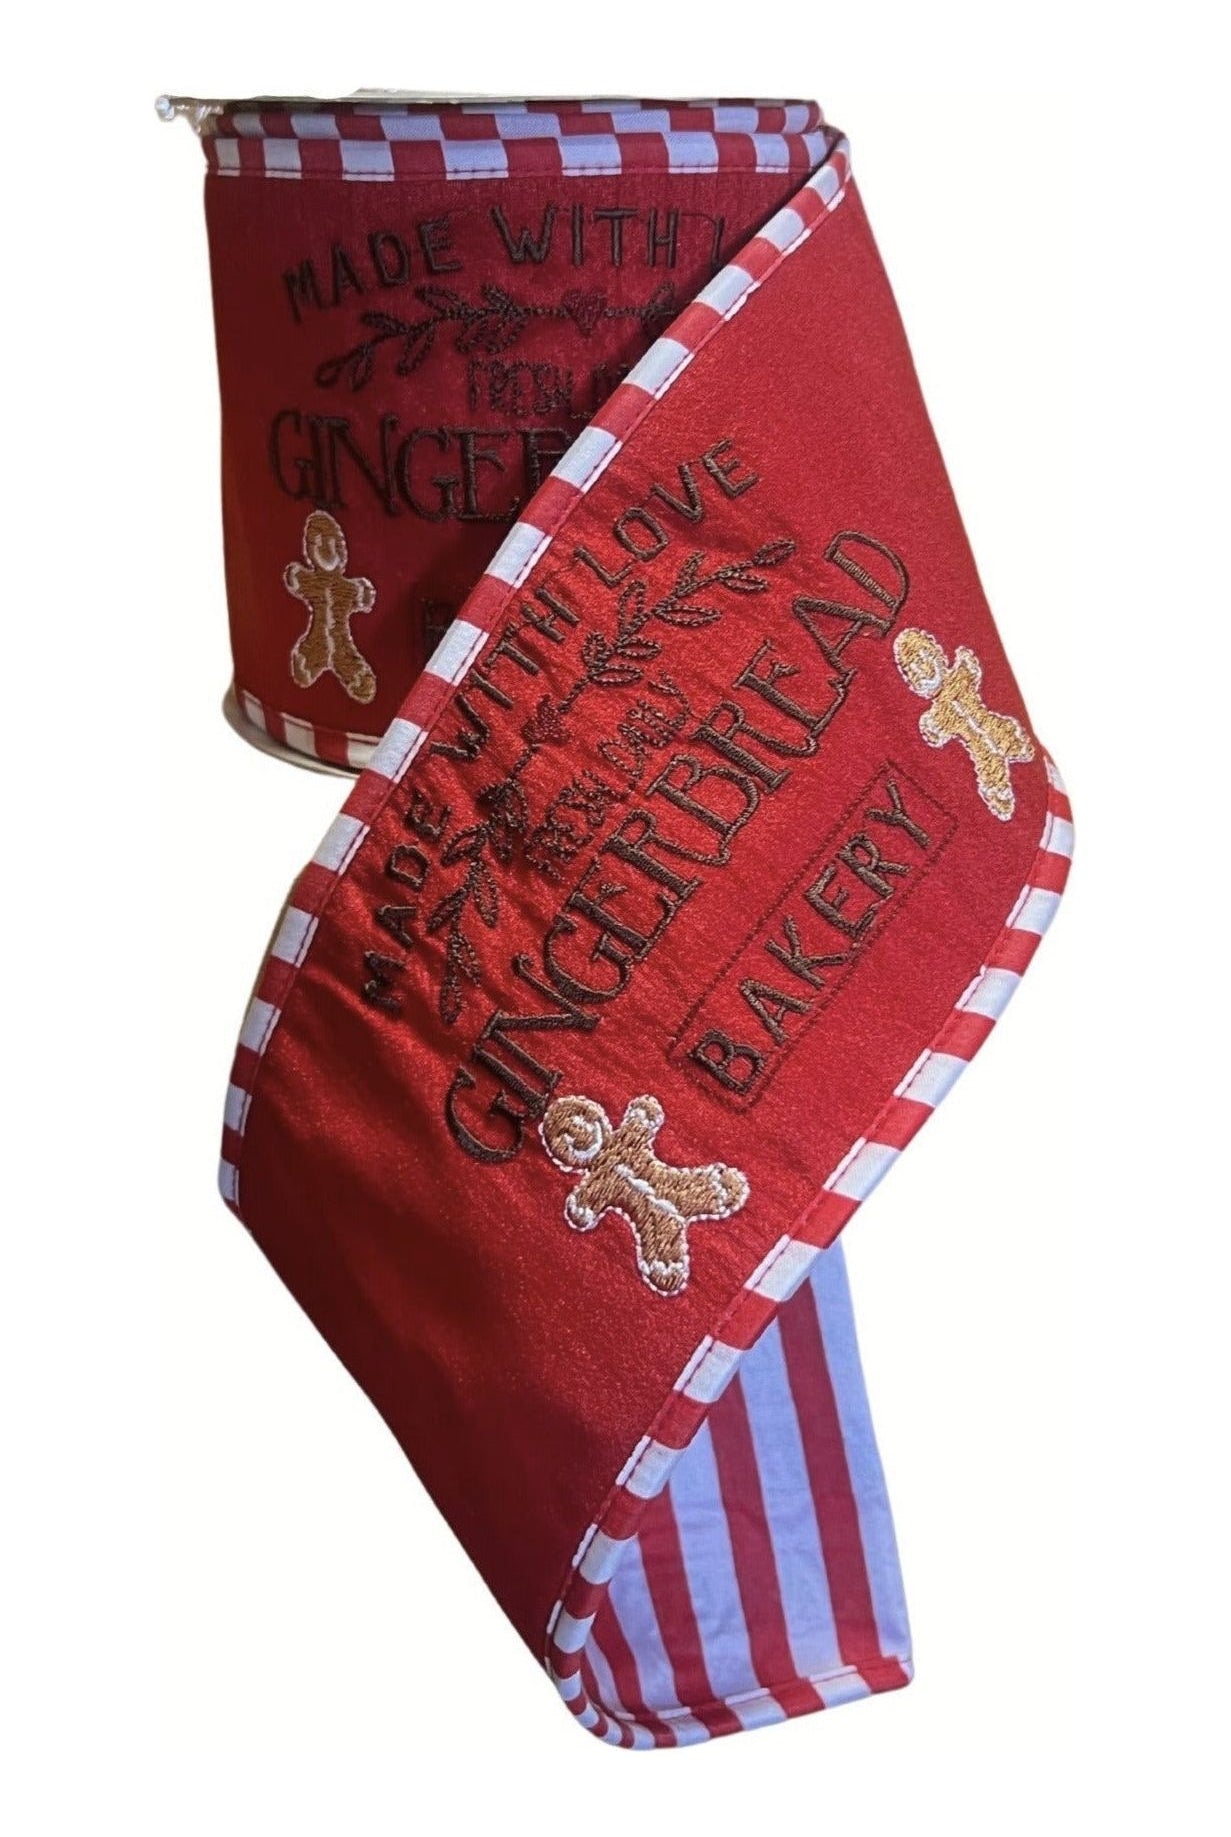 Shop For 4" Gingerbread Bakery Ribbon: Red (10 Yards) DCR21130